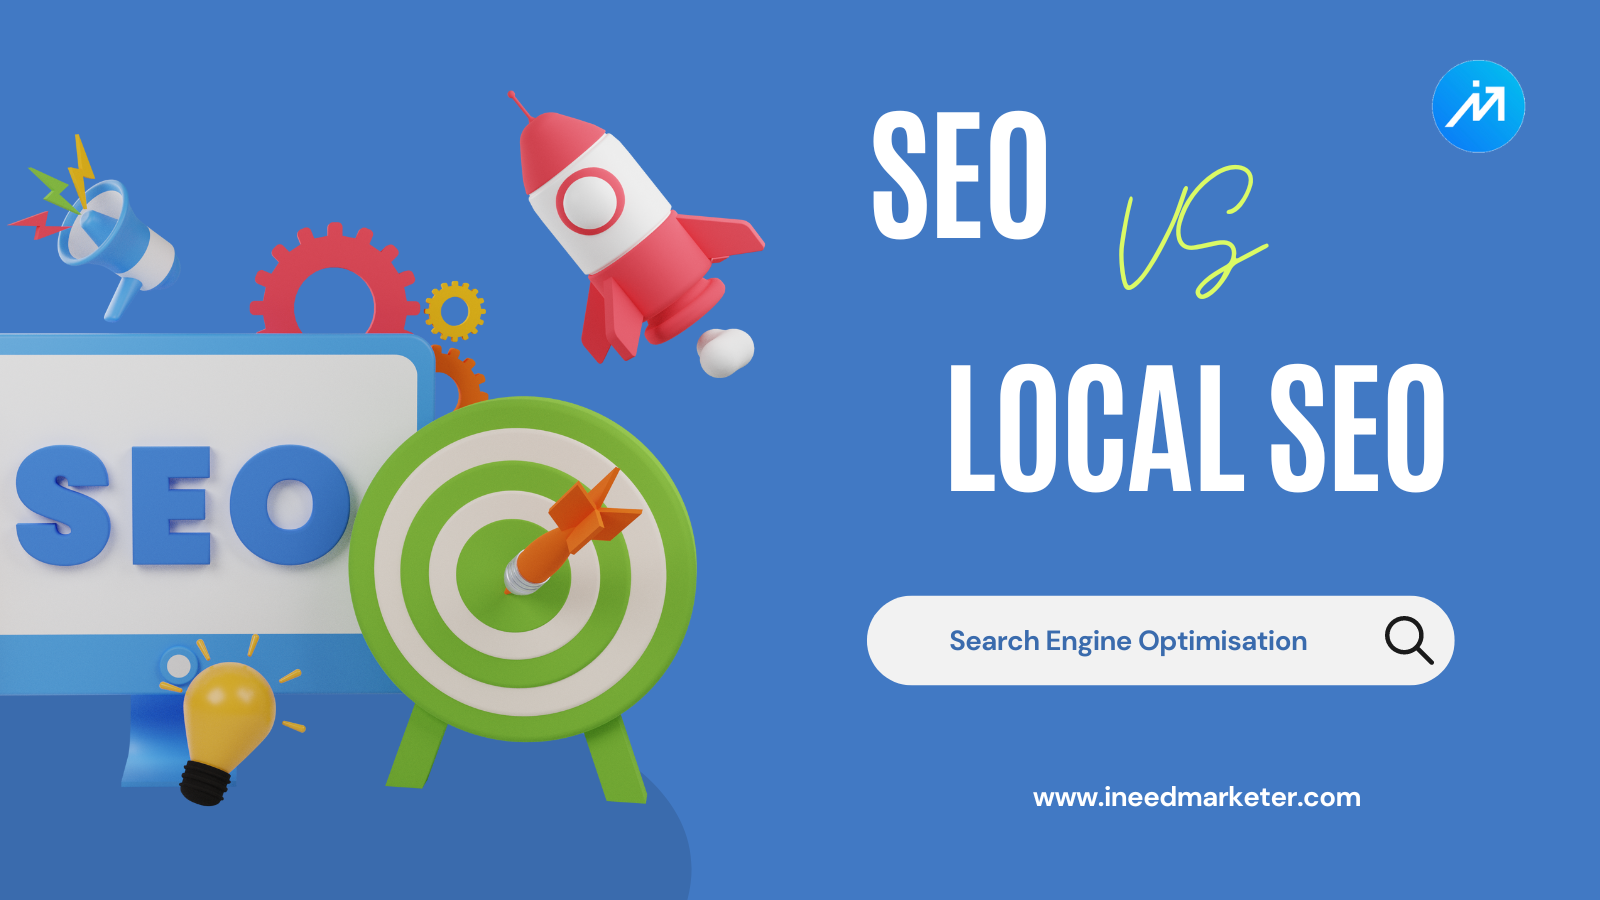 What is the difference between SEO and Local SEO